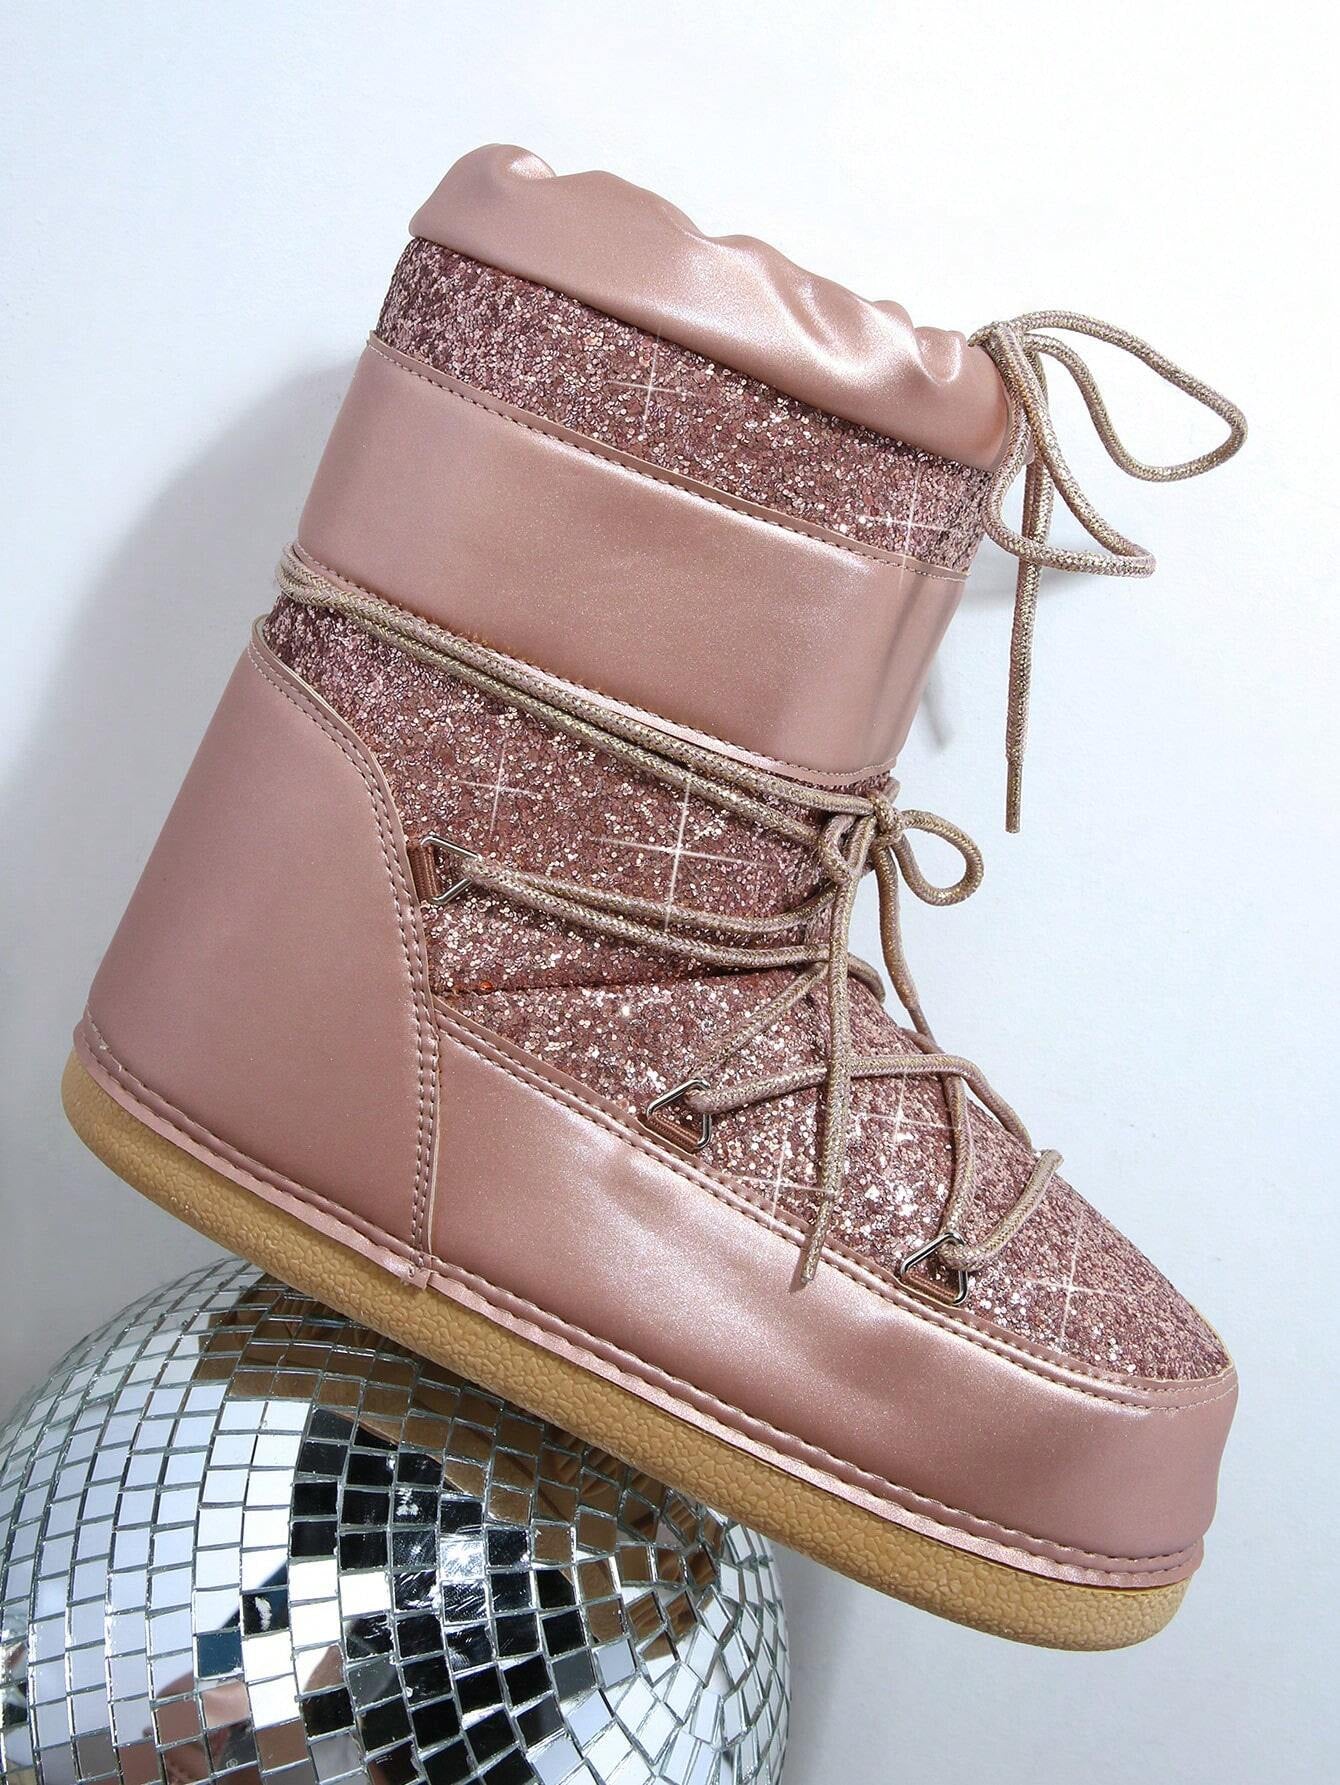 Ankle Boots with Glittery Lace-Up Front.